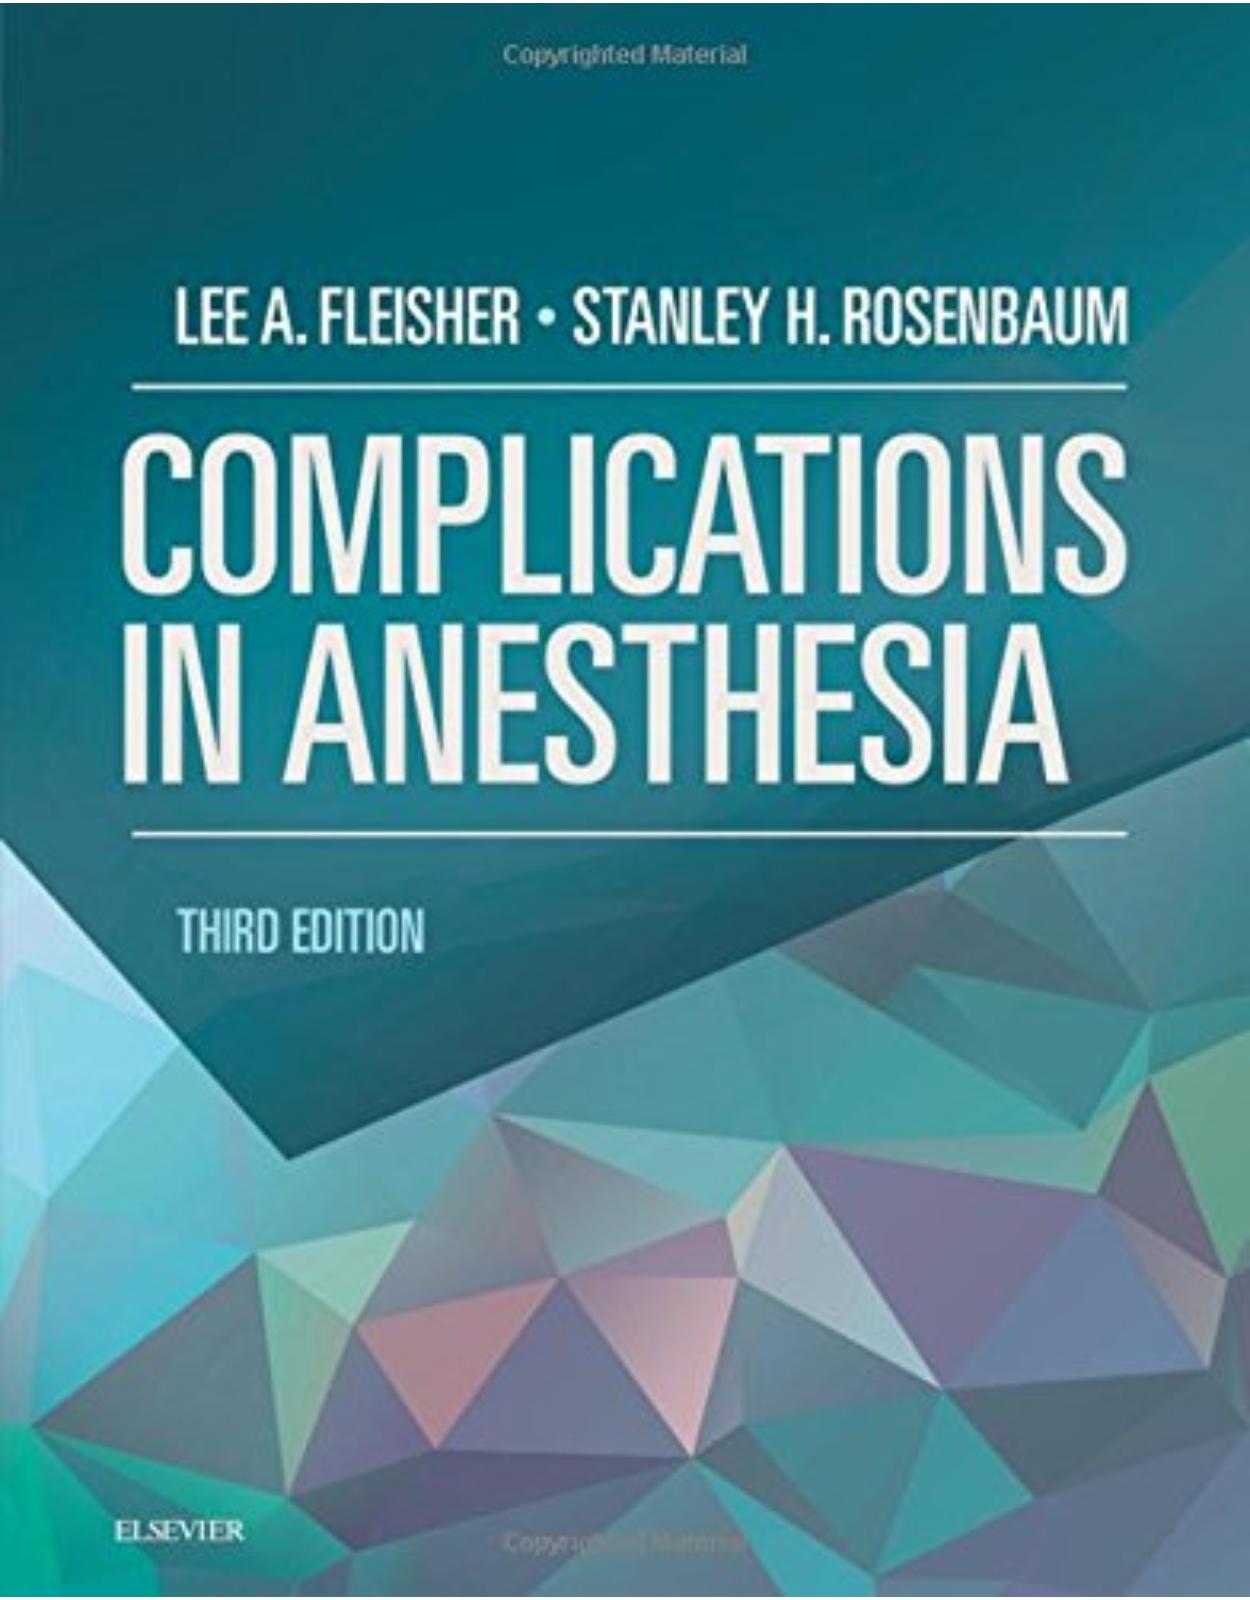 Complications in Anesthesia, 3rd Edition